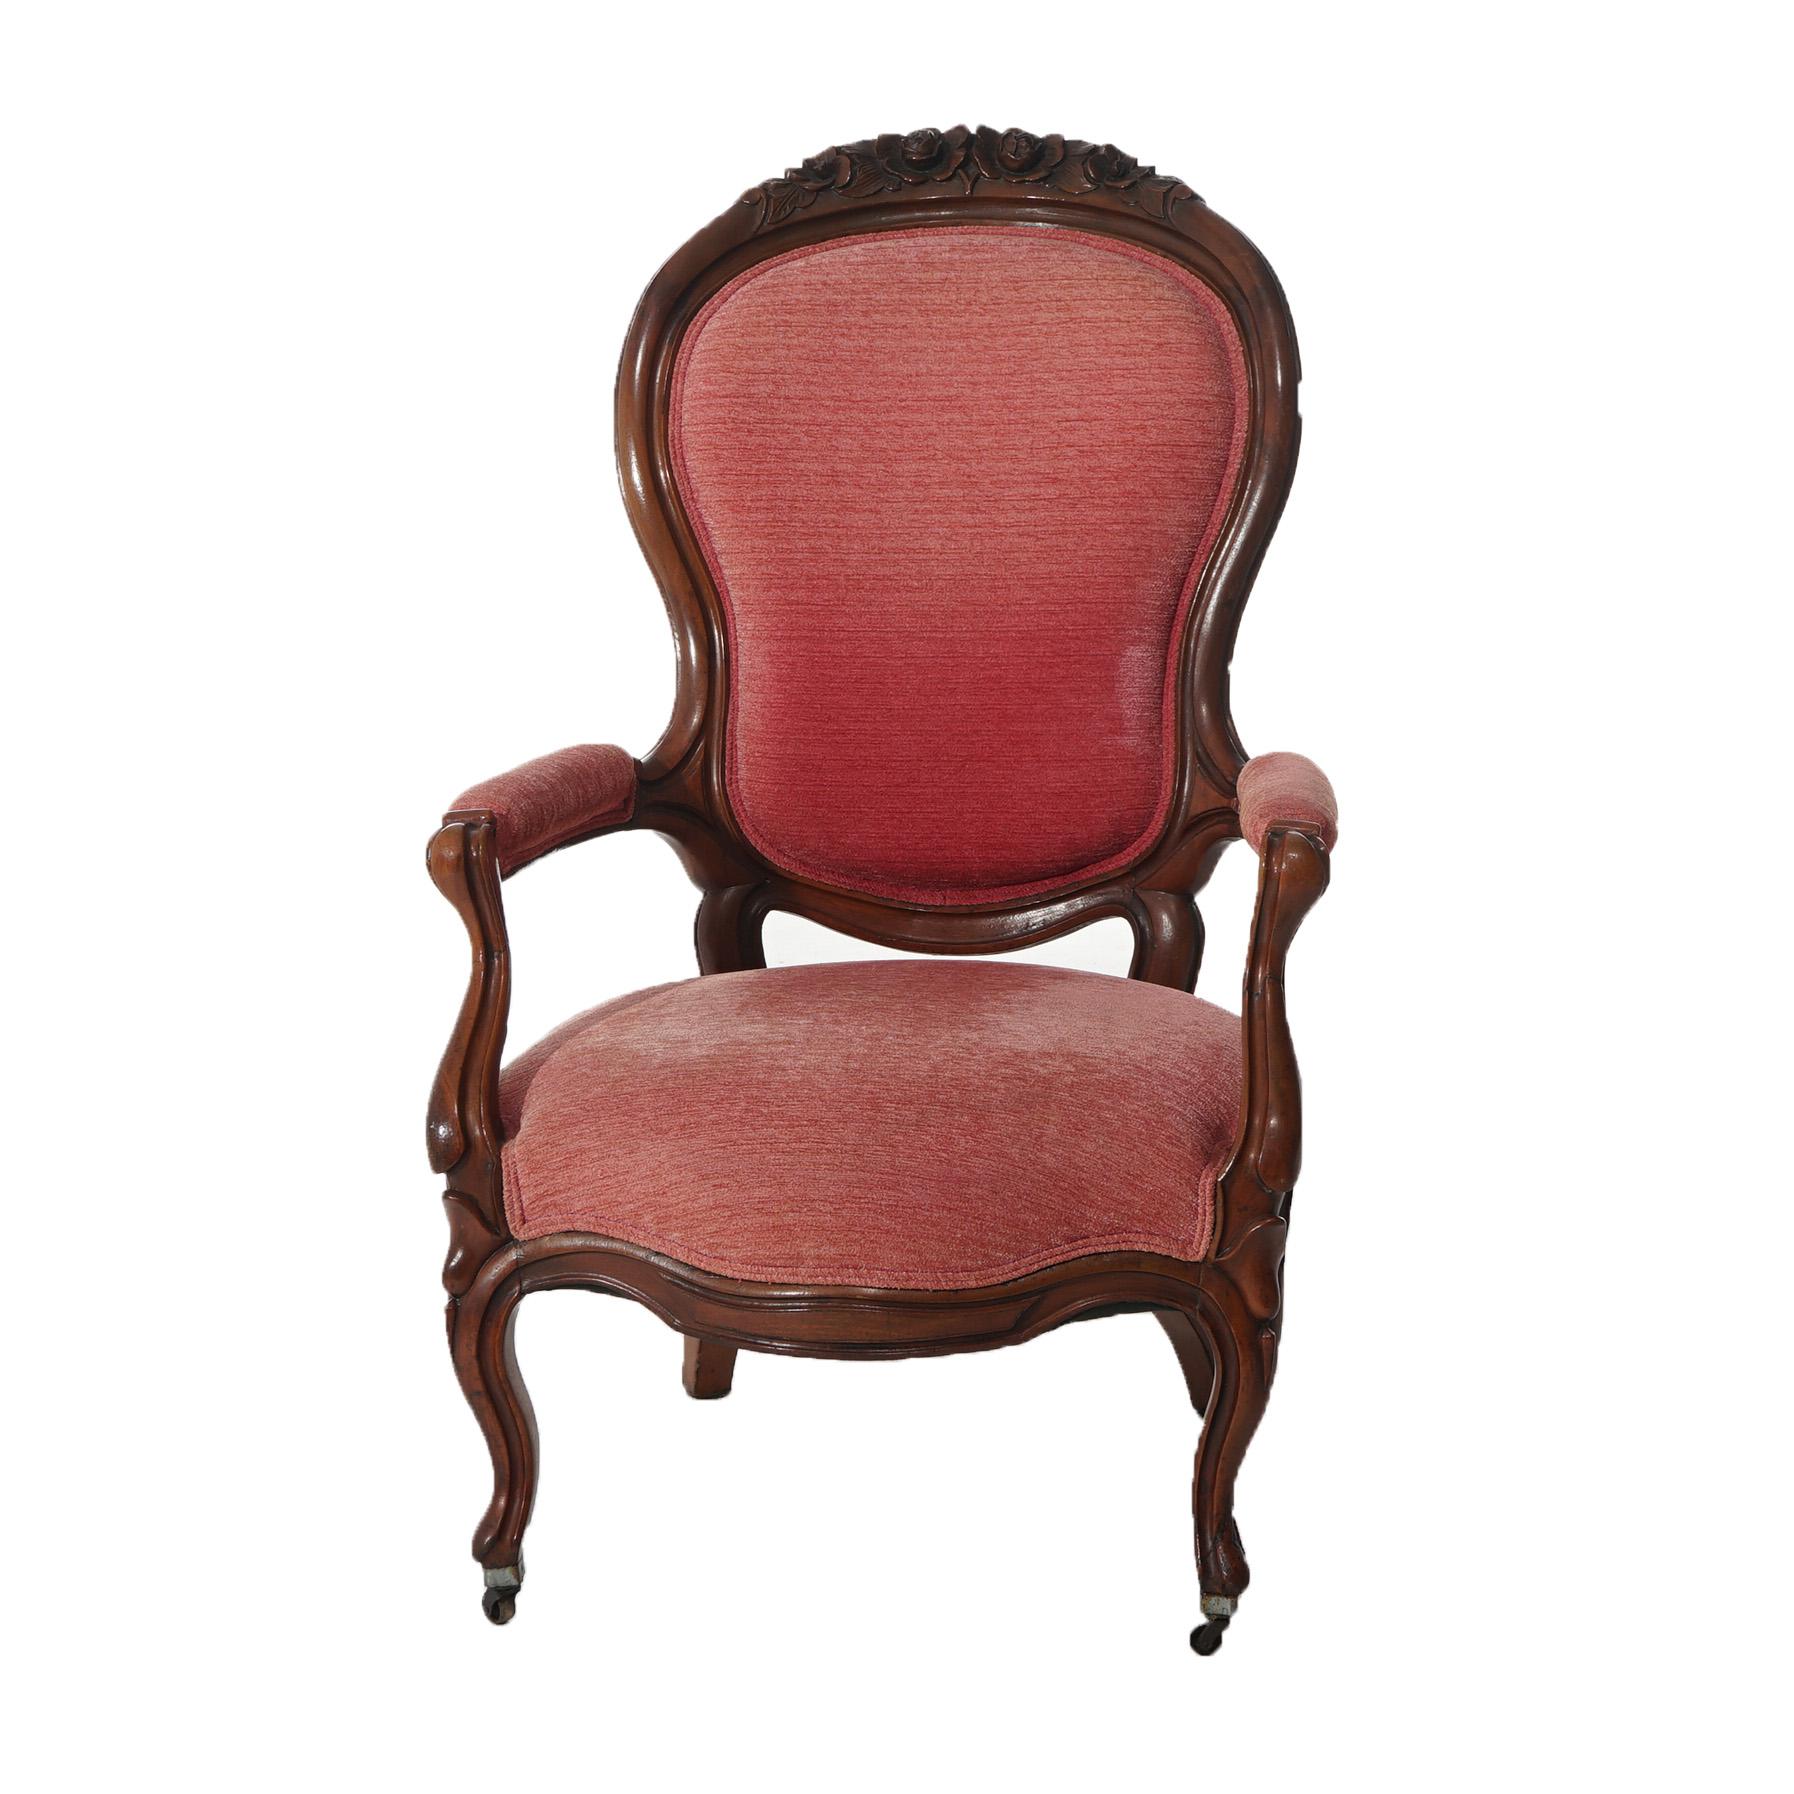 ***Ask About Reduced In-House Delivery Rates - Reliable Professional Service & Fully Insured***
A Victorian oversized armchair offers walnut frame with deeply carved floral crest over upholstered back, seat and arms, raised on cabriole legs,